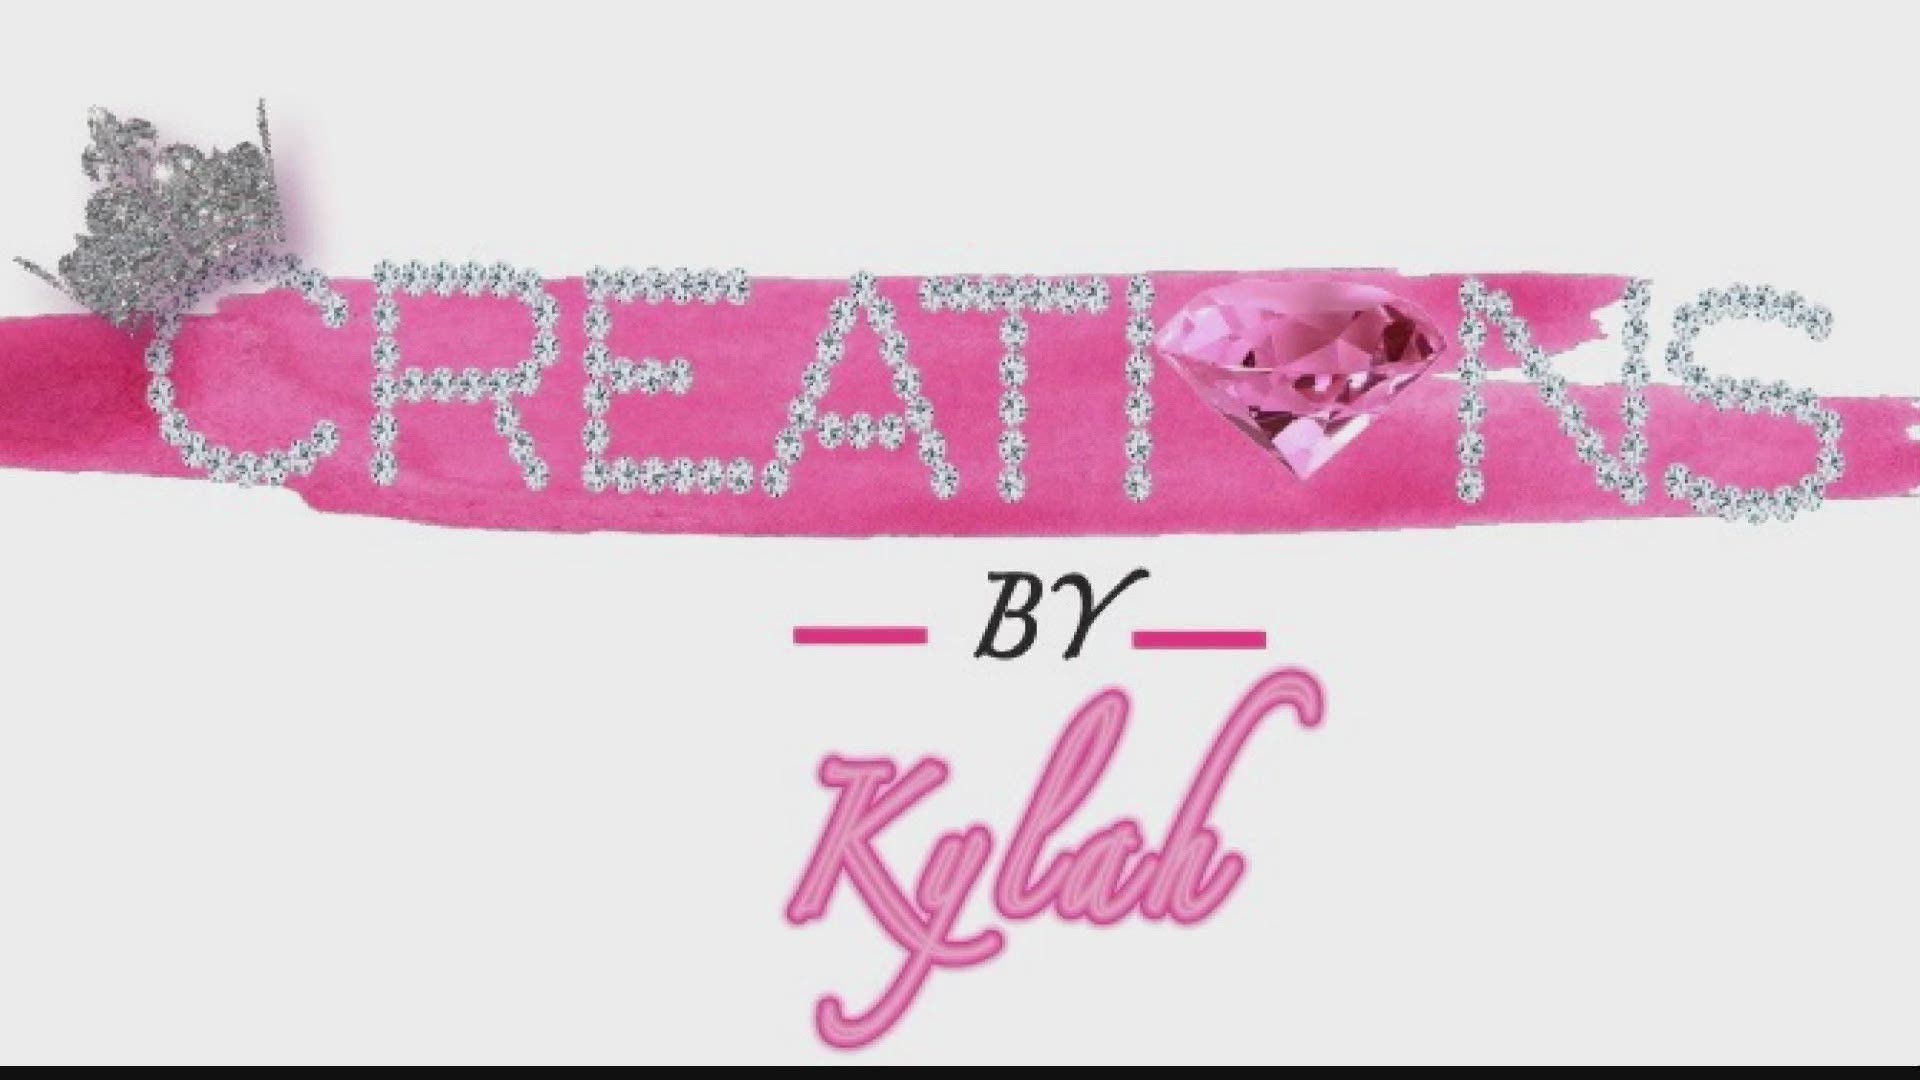 Creations by Kylah was created last year when Kylah's mother saw her daughter's passion for cosmetology.